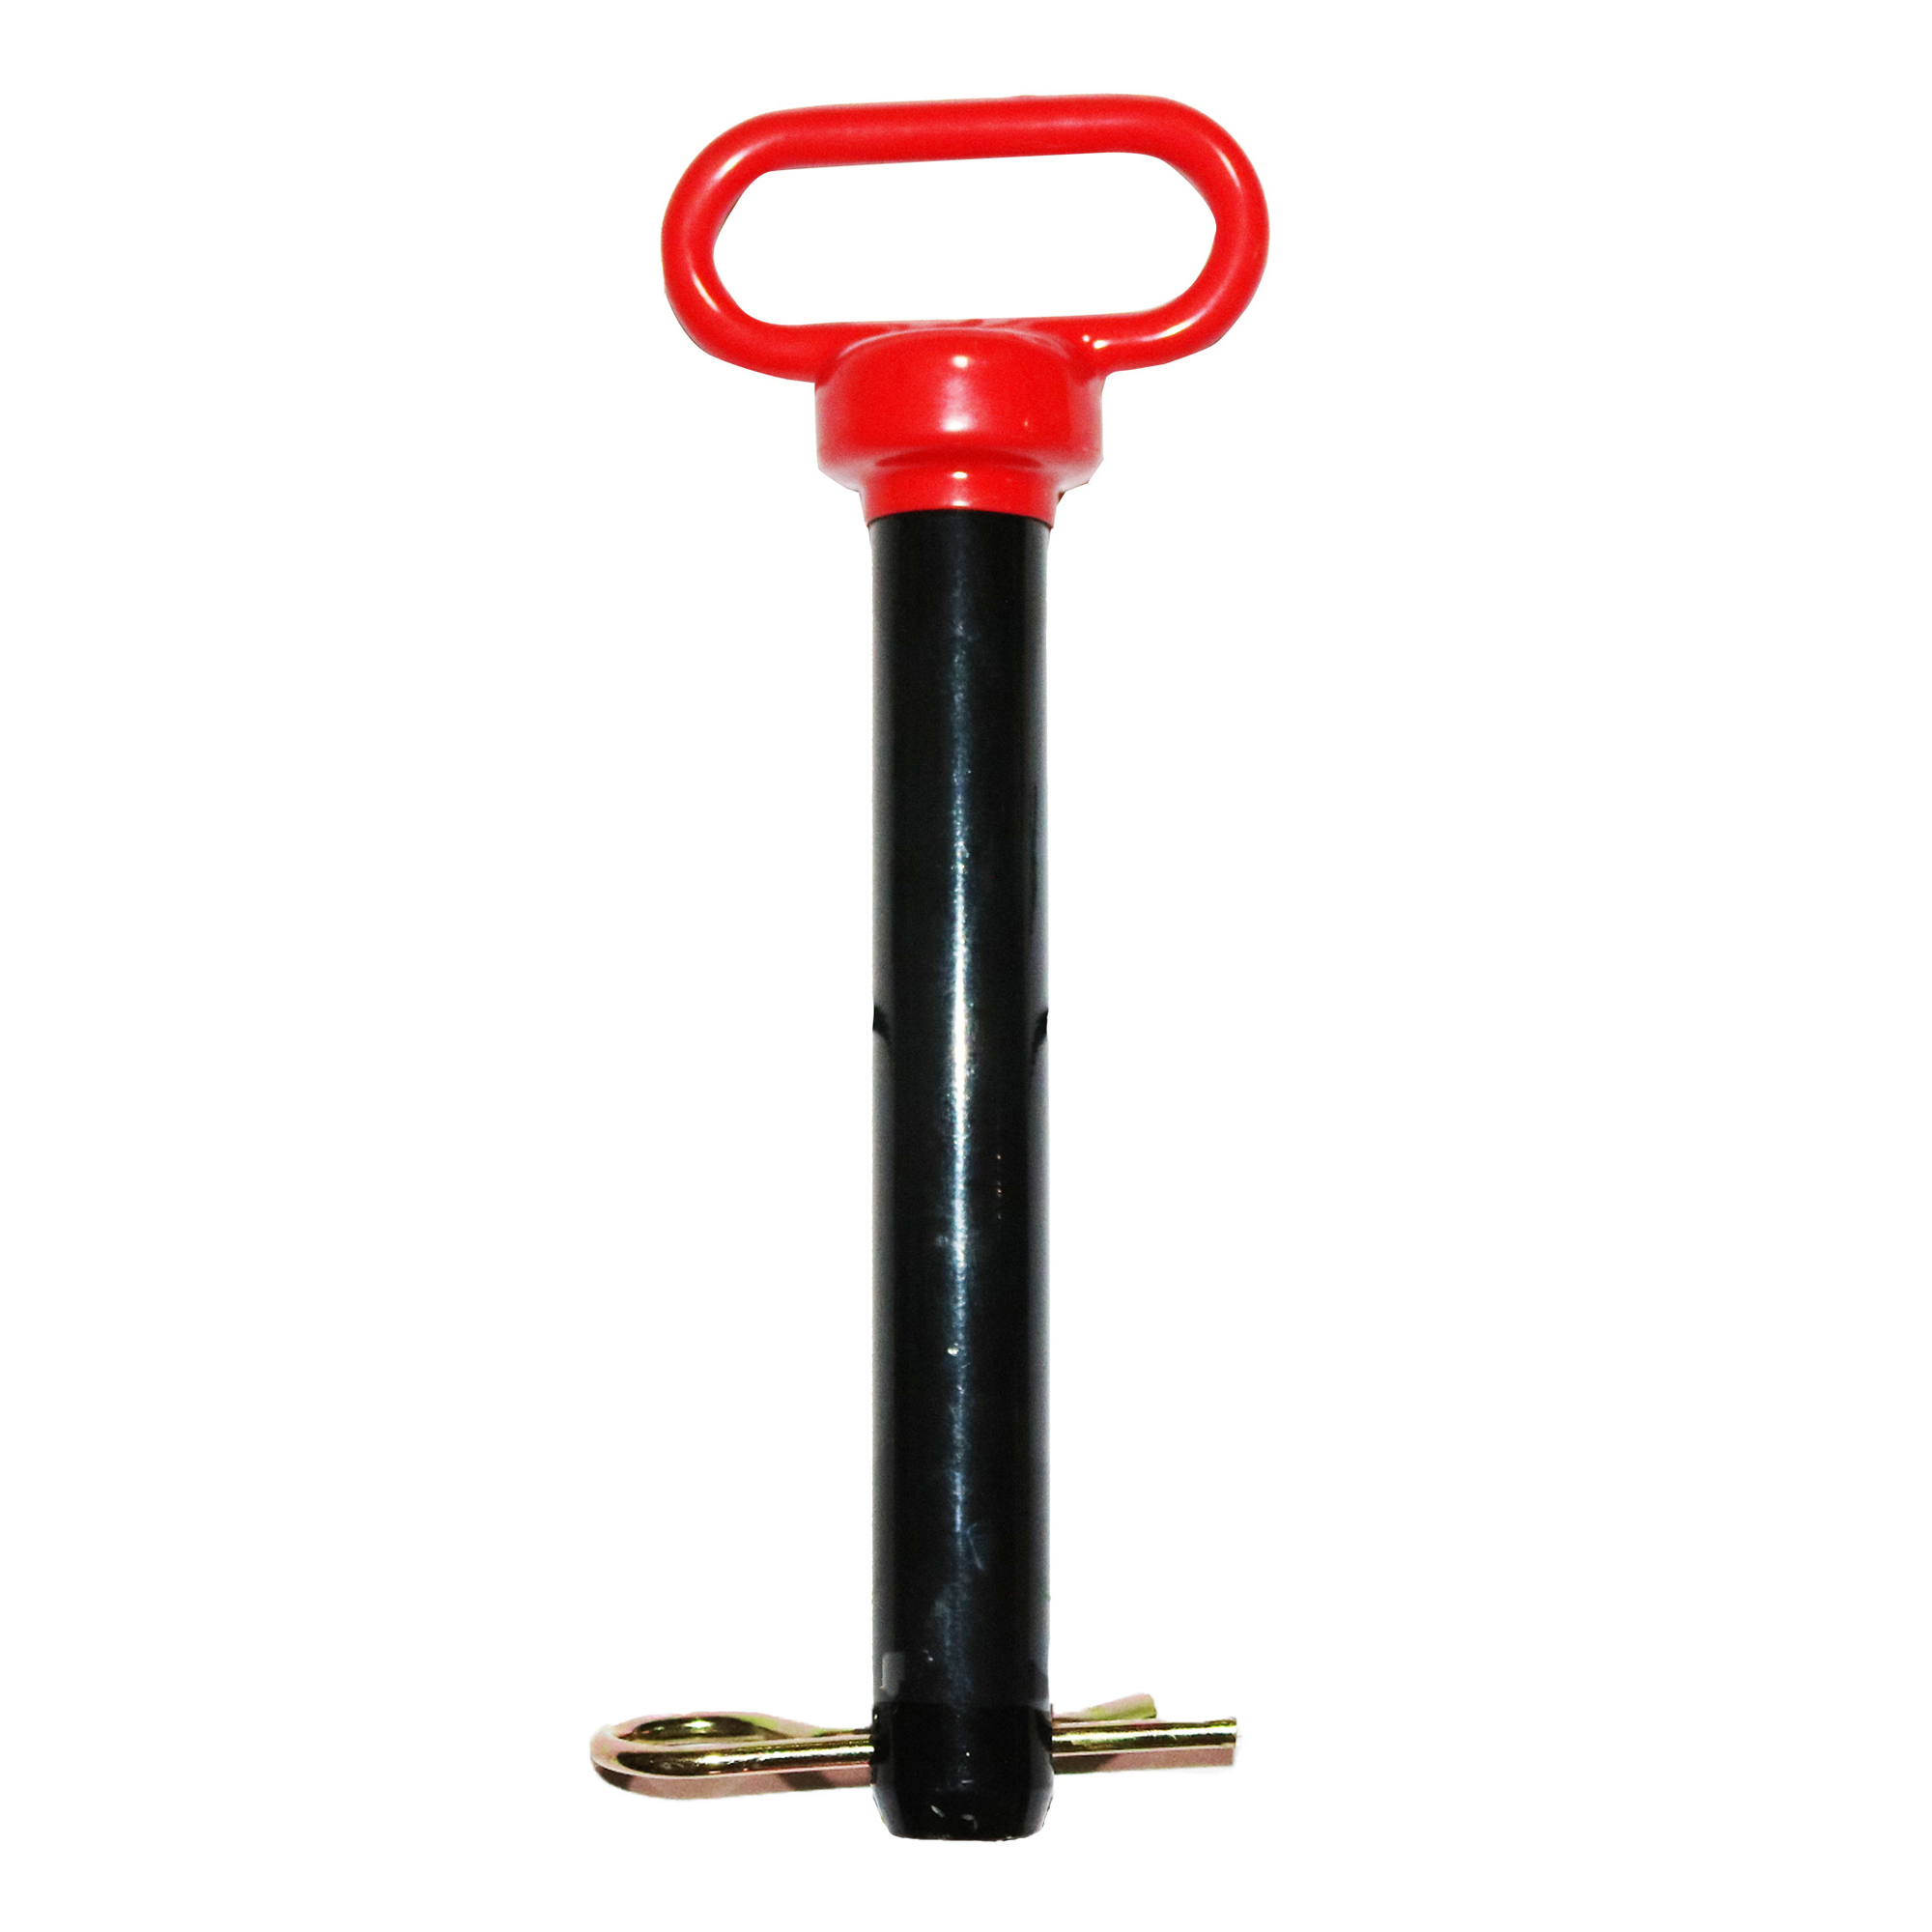 Braber Equipment, Grade 5 Forged Hitch Pin 1-1/4Inch Diameter, Usable Length 8.5 in, Model 708HPR